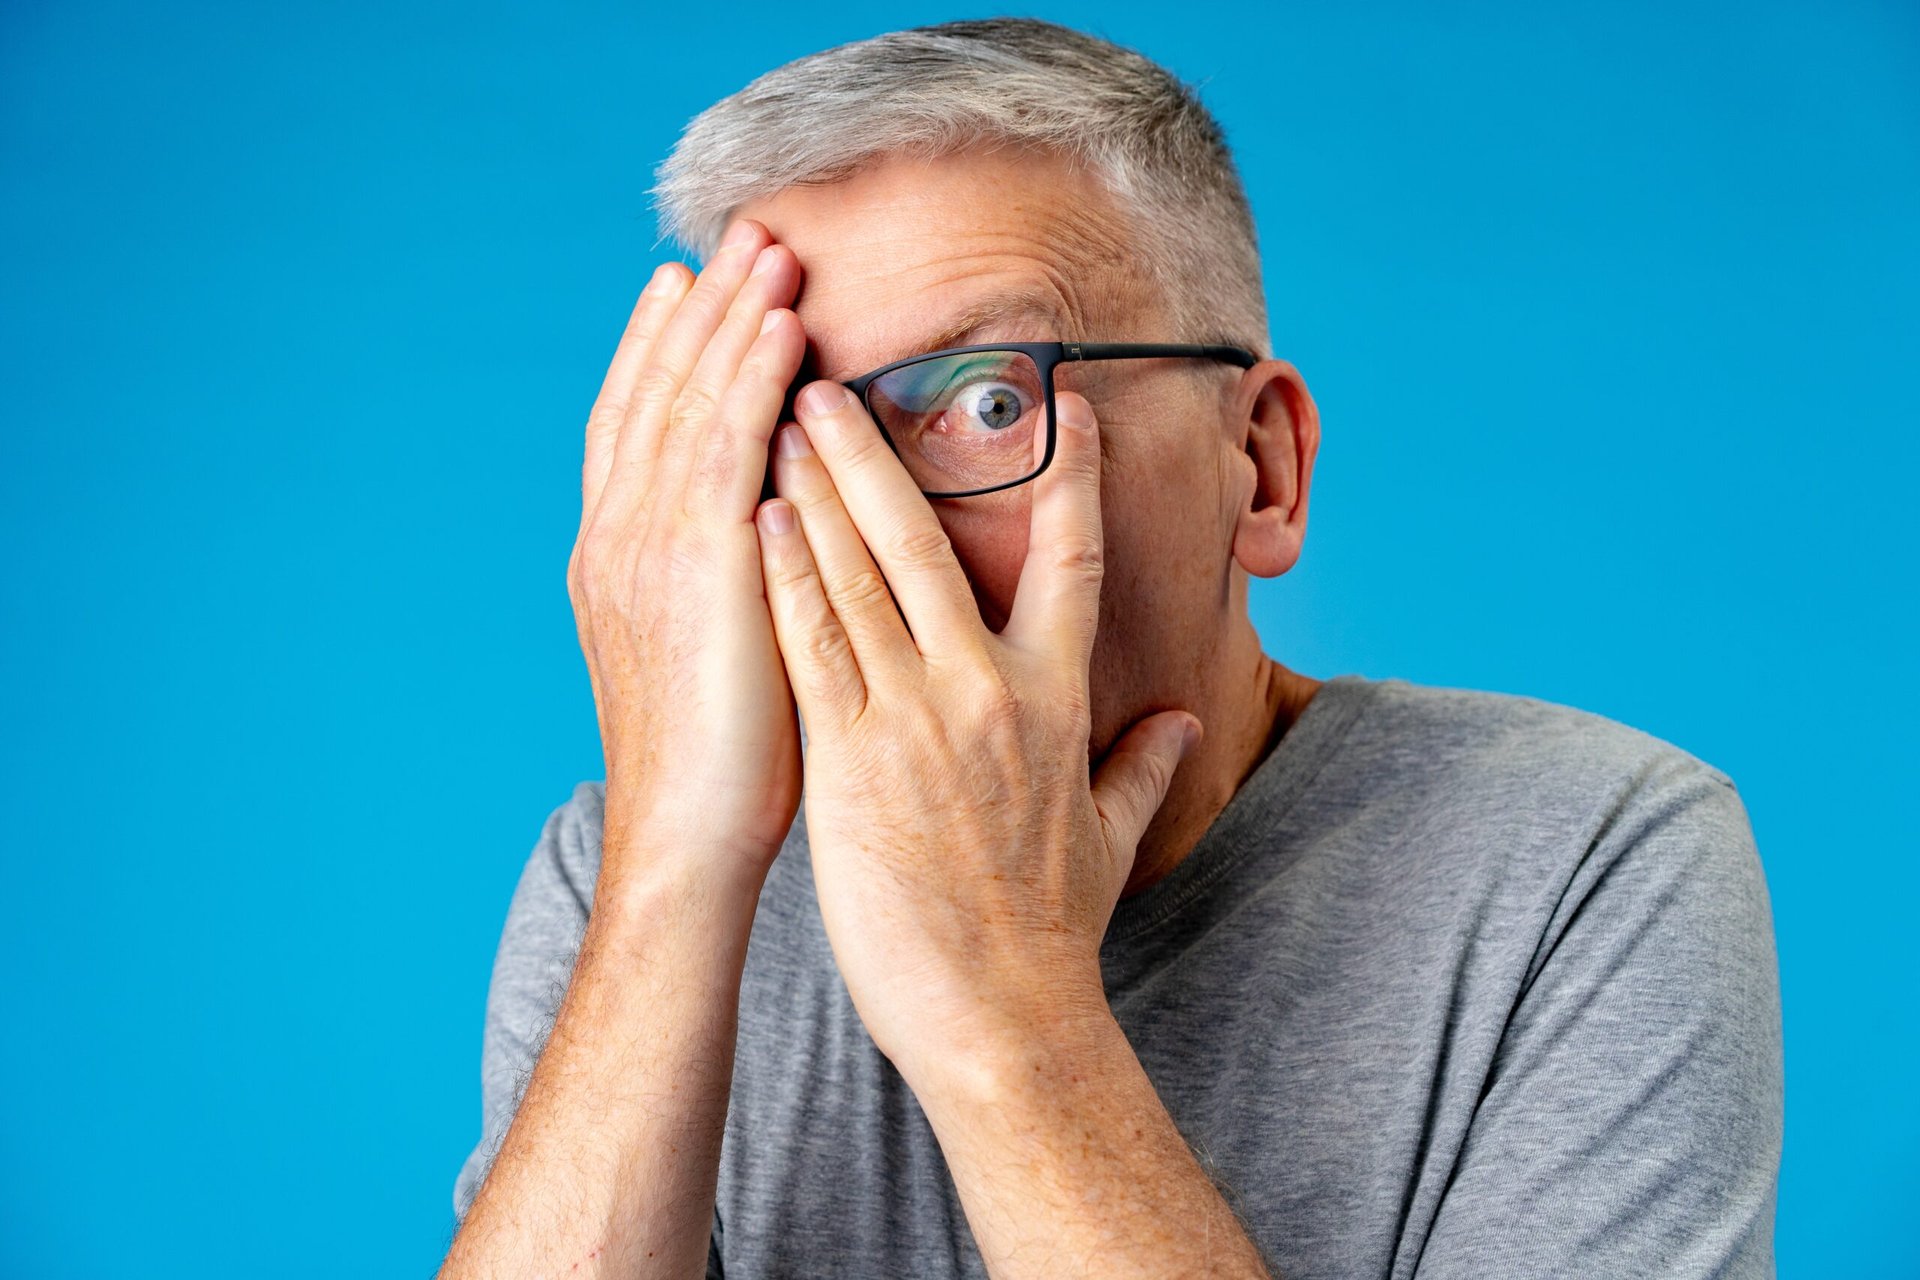 Panicked worried senior unable to look at something scary